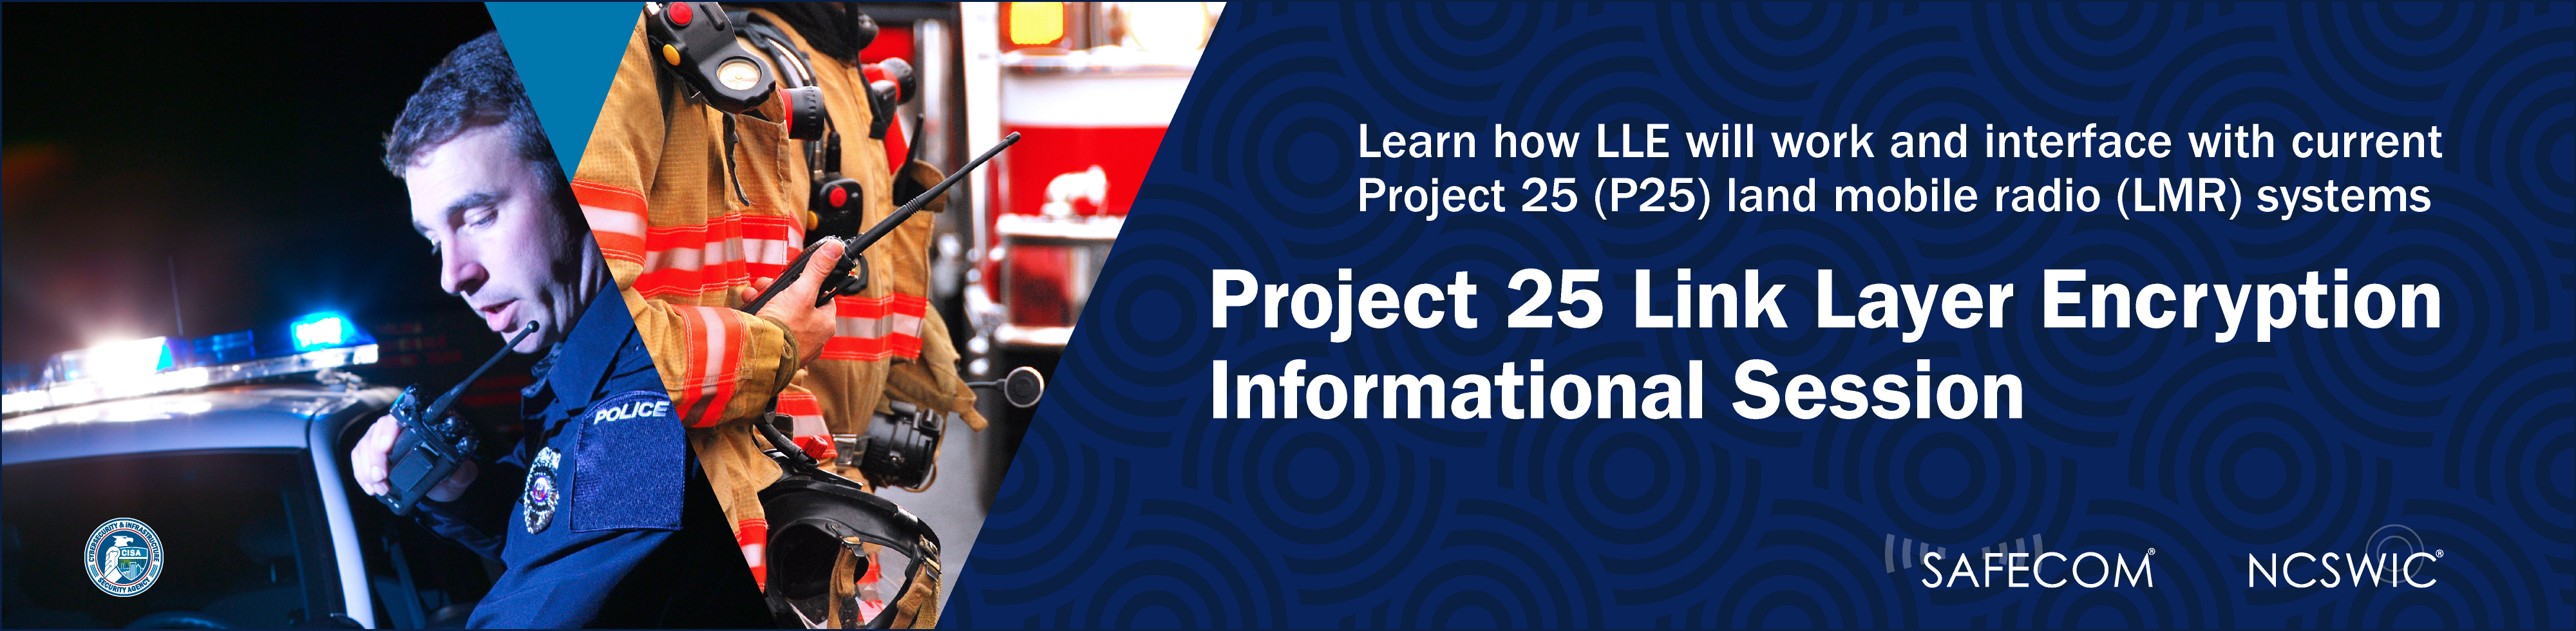 Project 25 Link Layer Encryption Informational Session - Learn how LLE will work and interface with current Project 25 Land Mobile Radio Systems